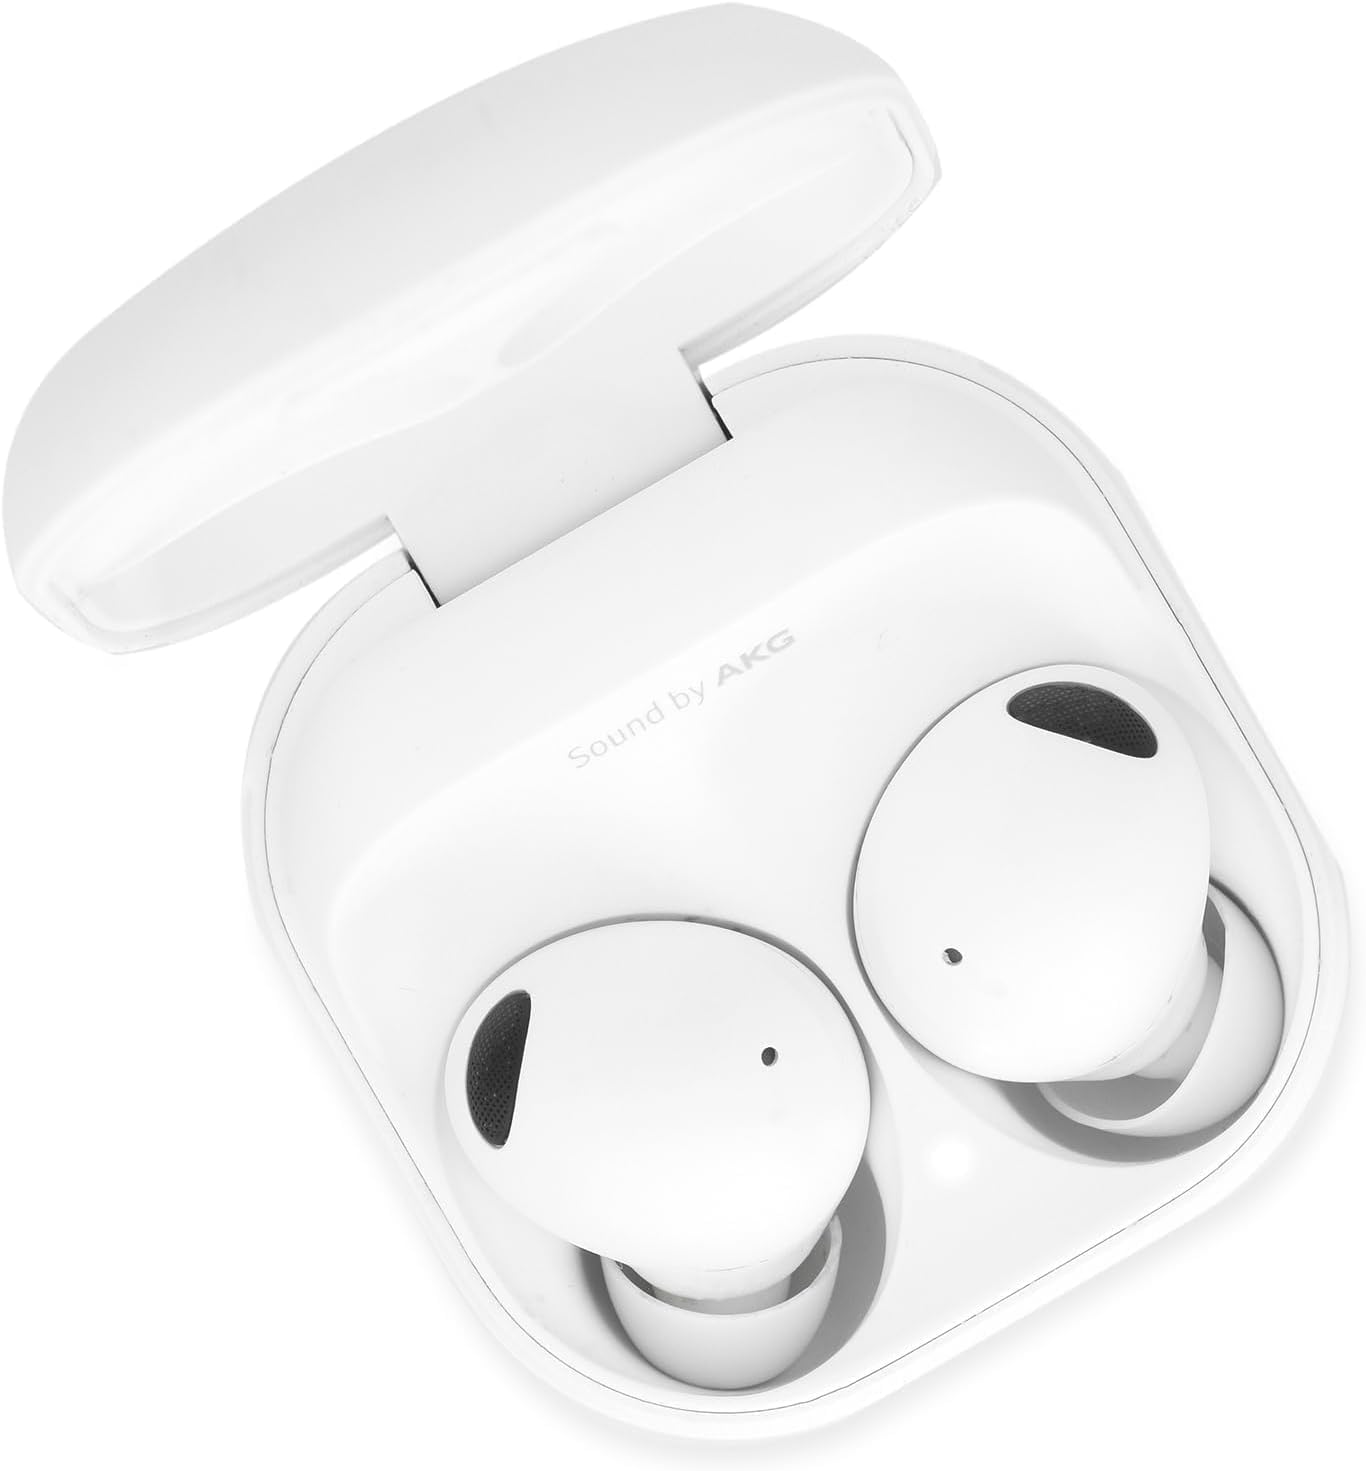 Samsung Galaxy Buds 2 Pro Review: Unleash the Power of True Wireless Earbuds